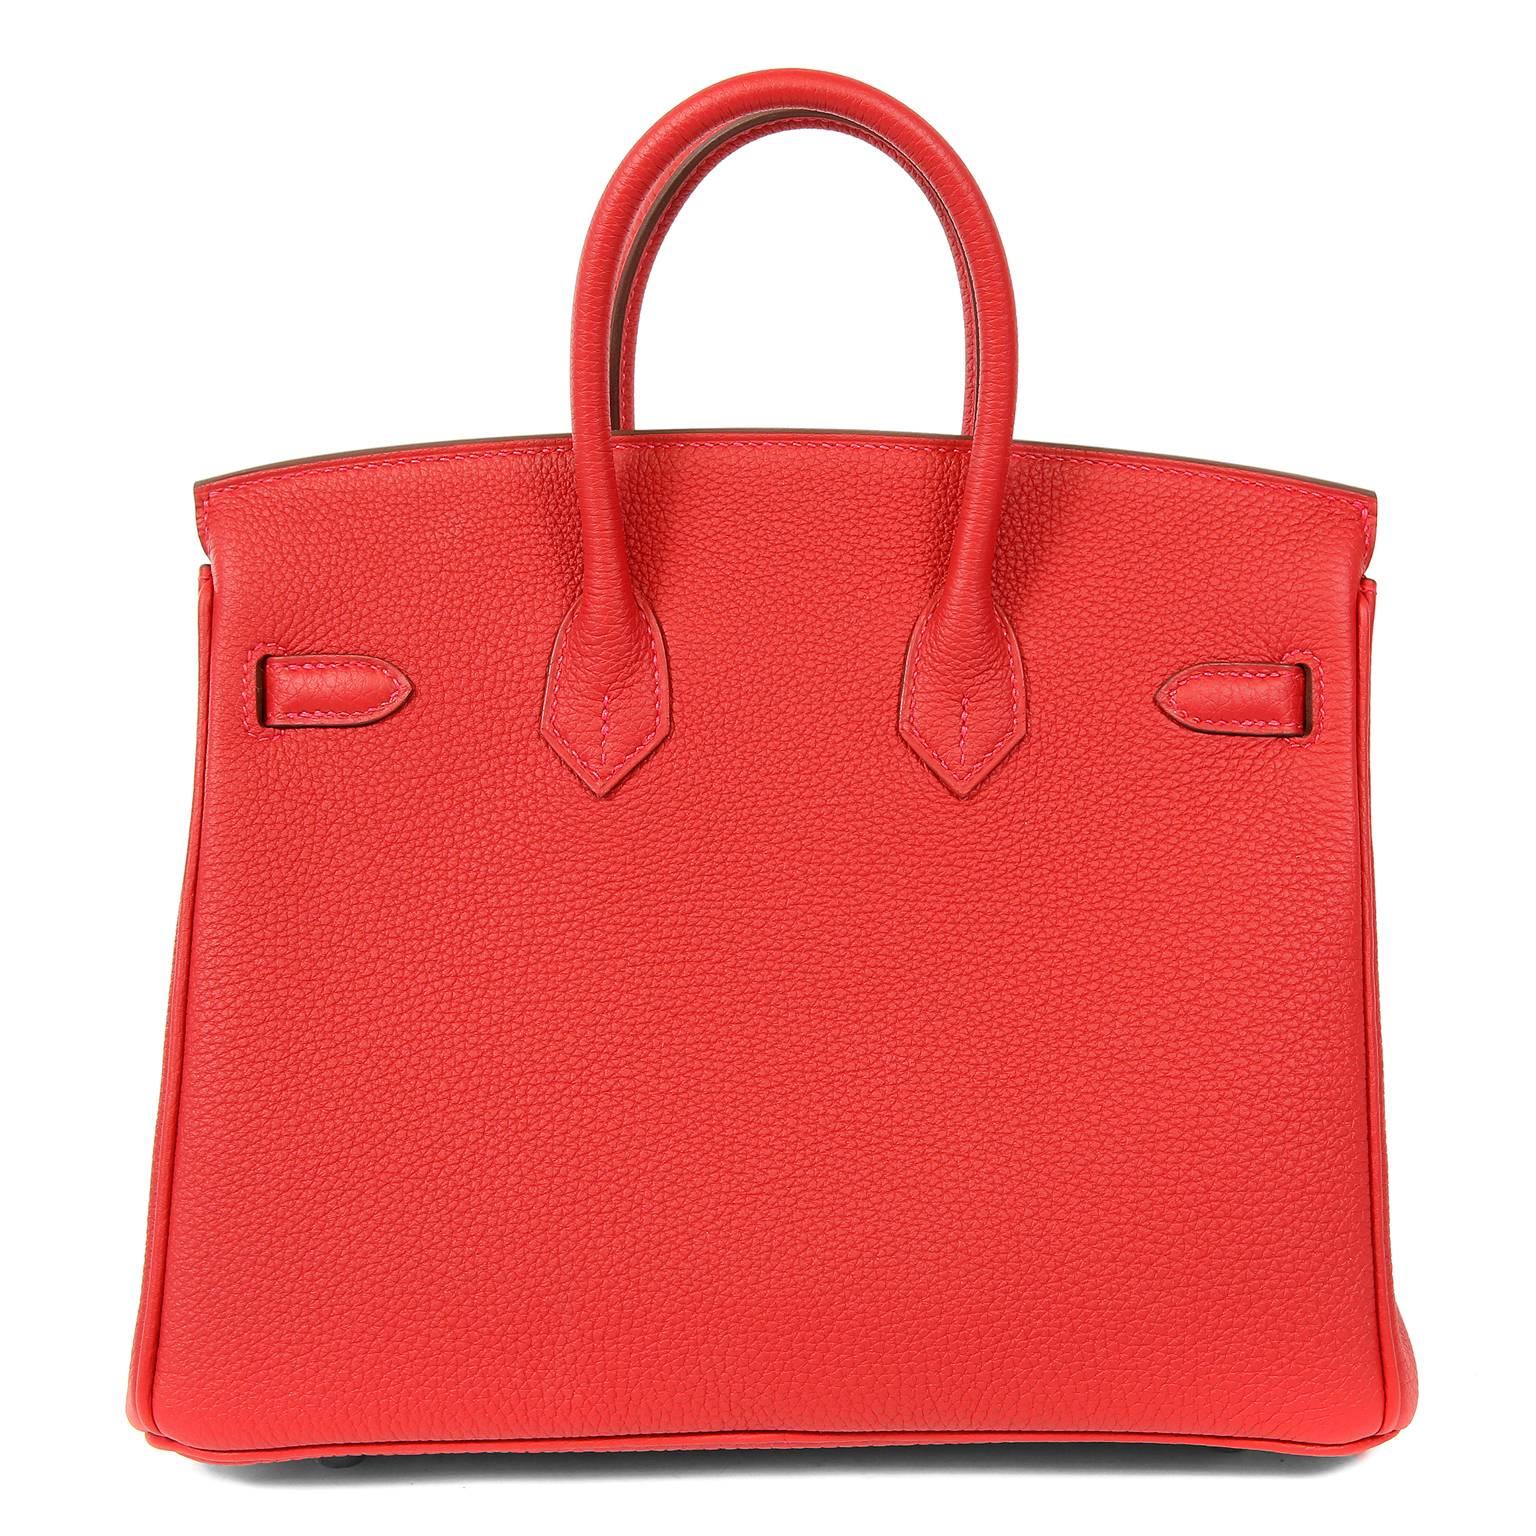 Hermès Rouge Garance Togo 25 cm Birkin Bag is in pristine unworn condition with the protective plastic intact on the hardware.  Waitlists exceeding a year are commonplace for the intensely coveted Birkin bag.  Each piece is hand crafted by skilled